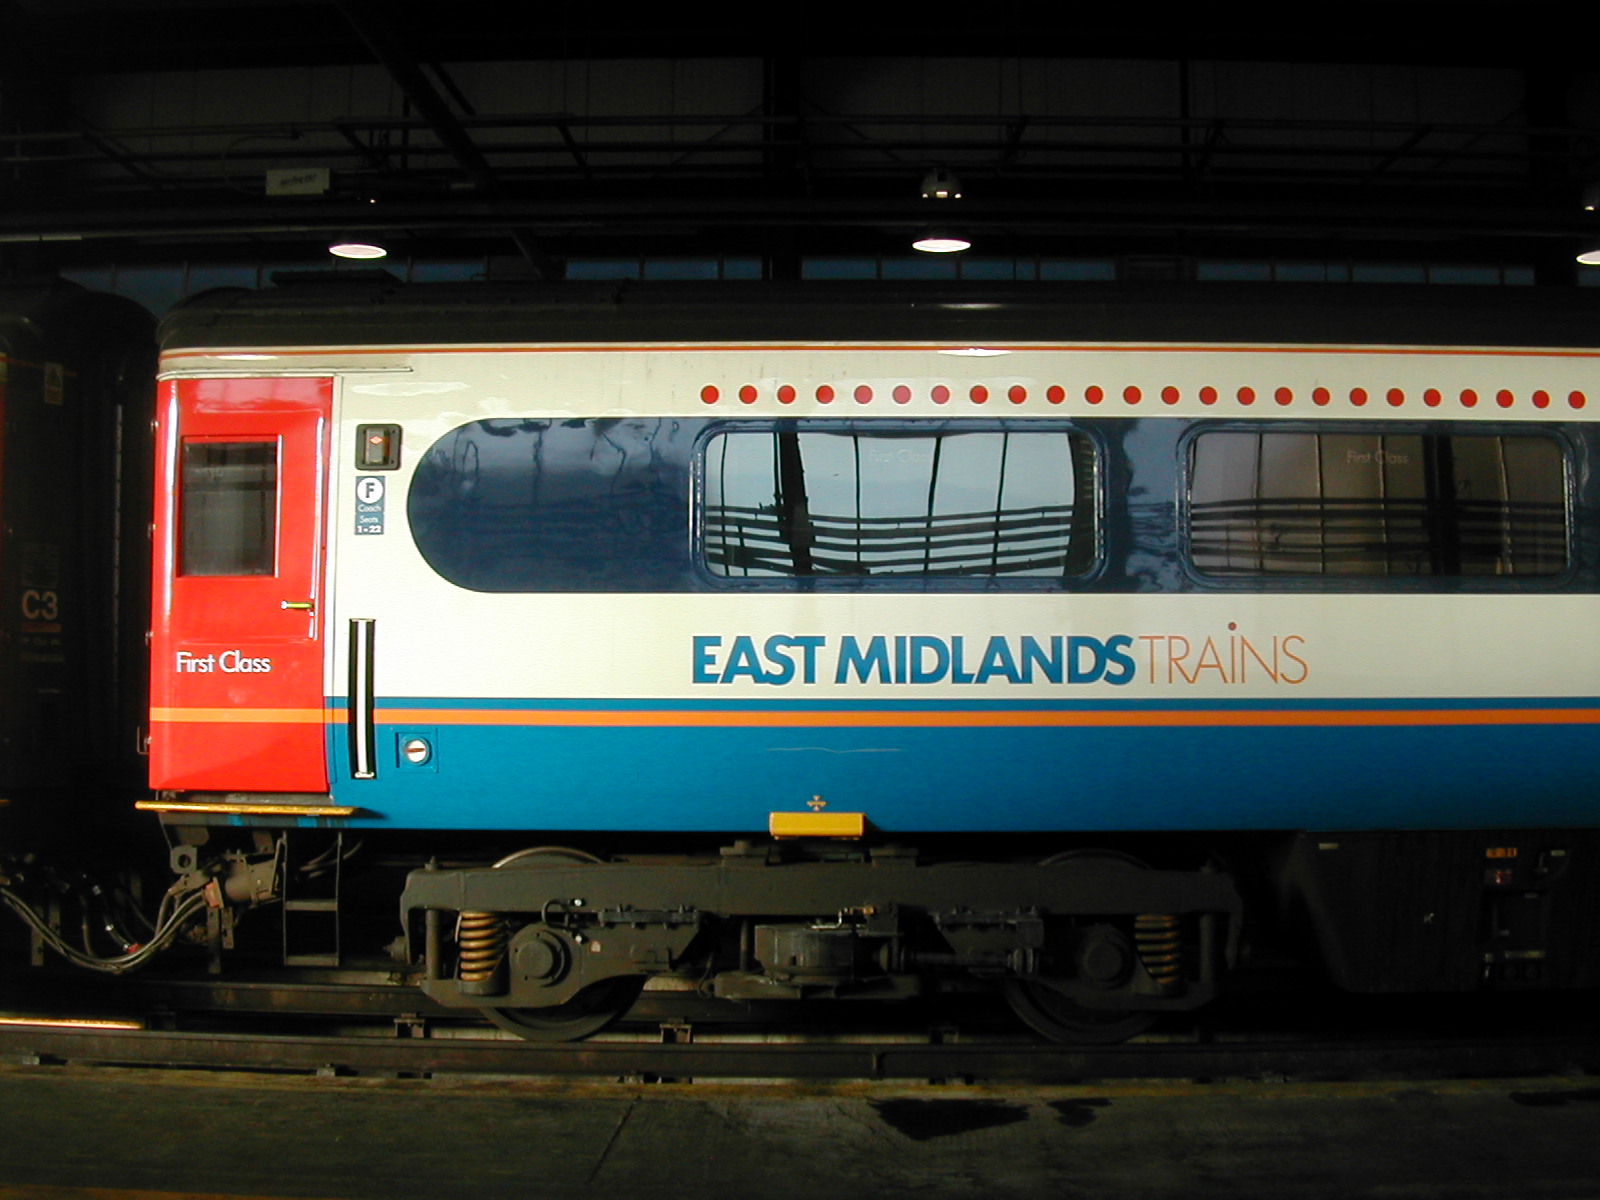 A shot of the end of a Mk3 coach